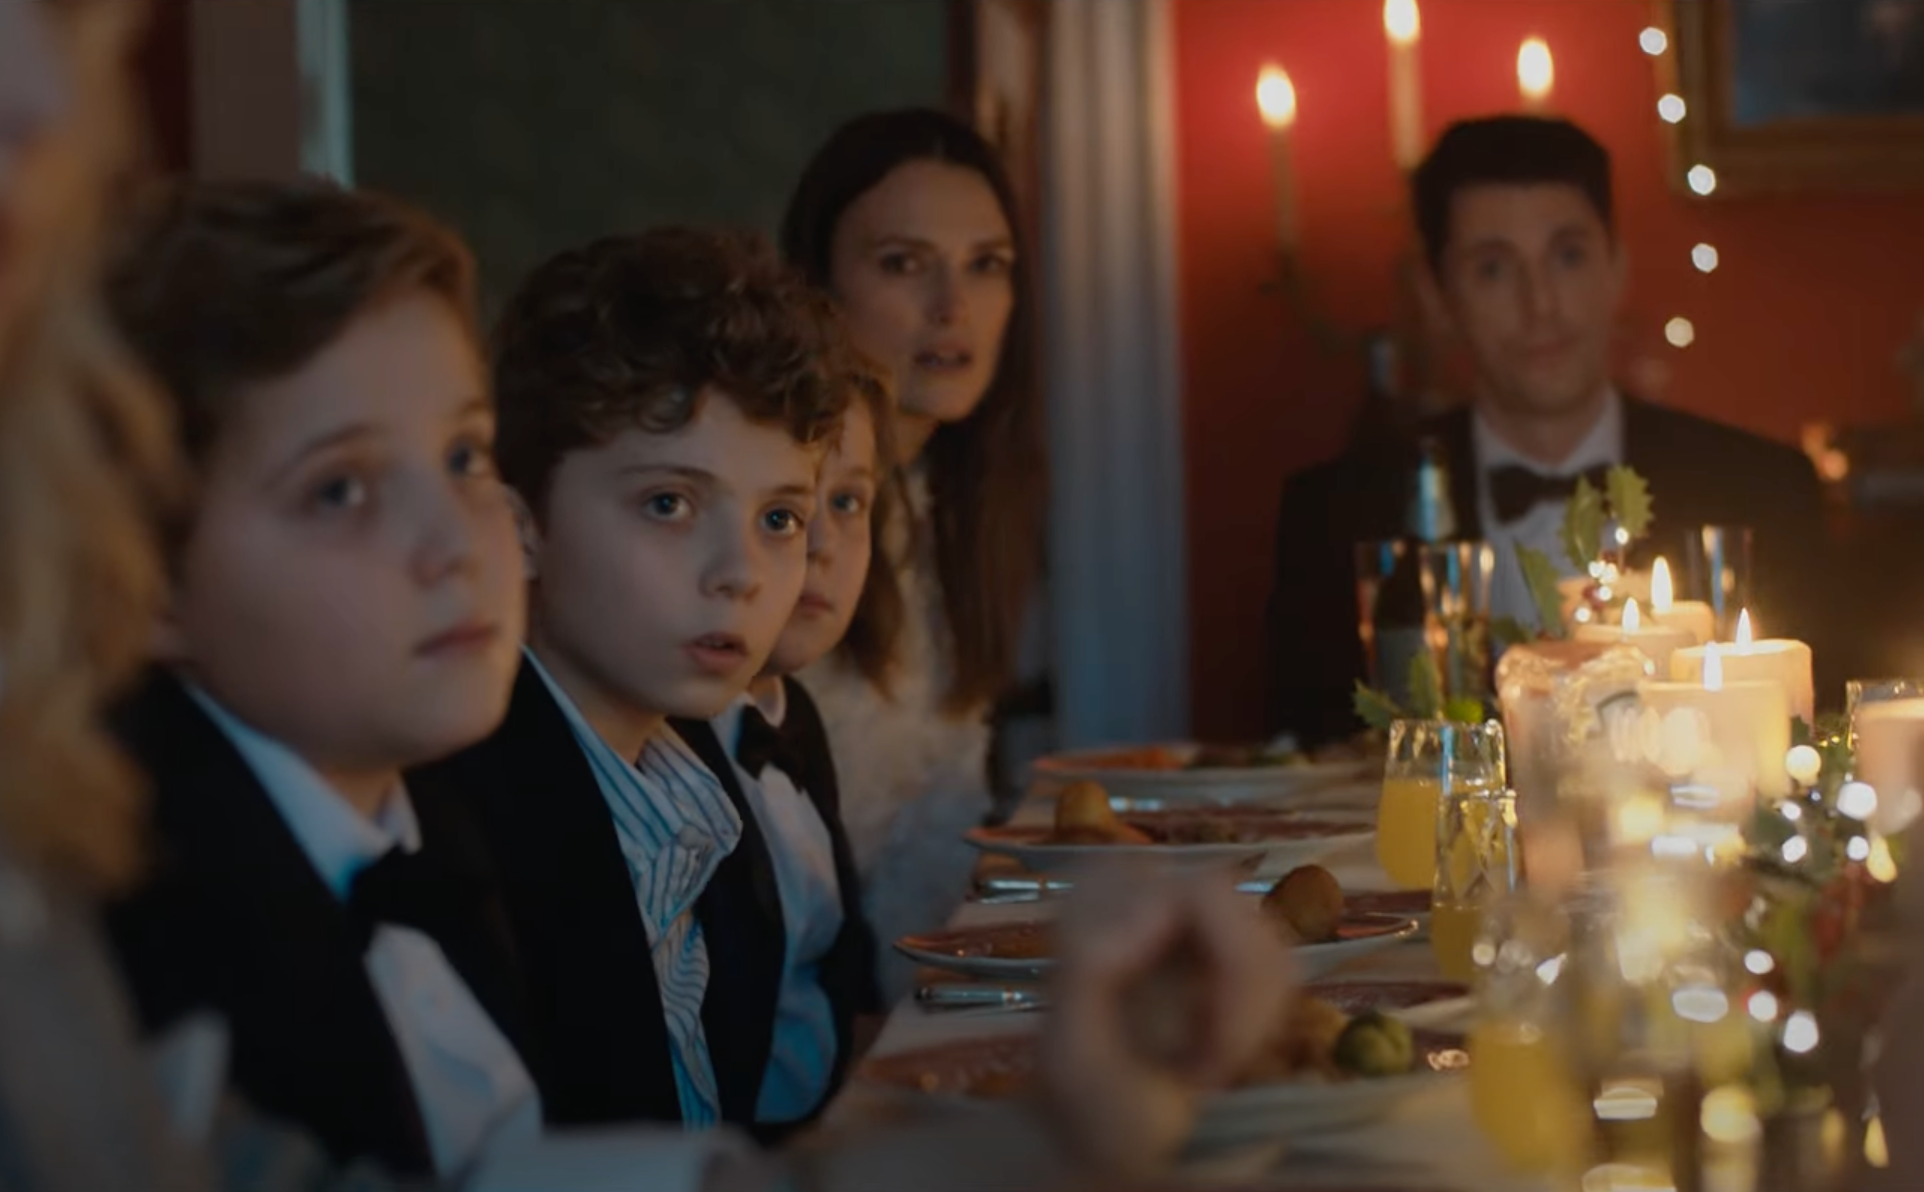 Keira Knightley and Matthew Goode anticipate the end of the world with an epic Christmas bash in Silent Night trailer